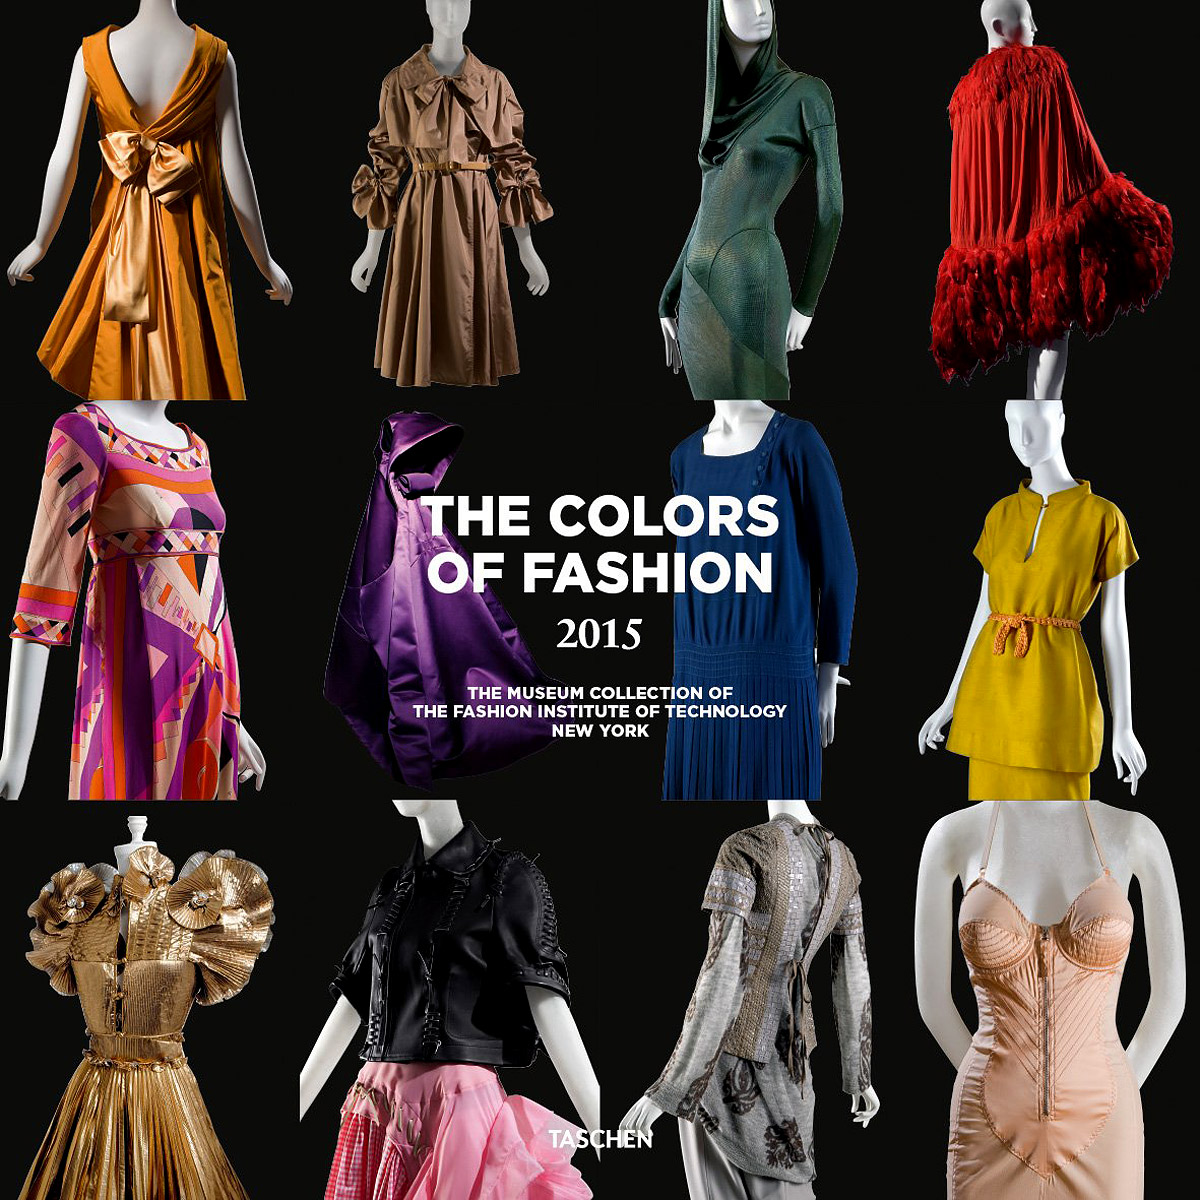 The Colors of Fashion 2015: The Museum Collection of the Fashion Institute of Technology New York